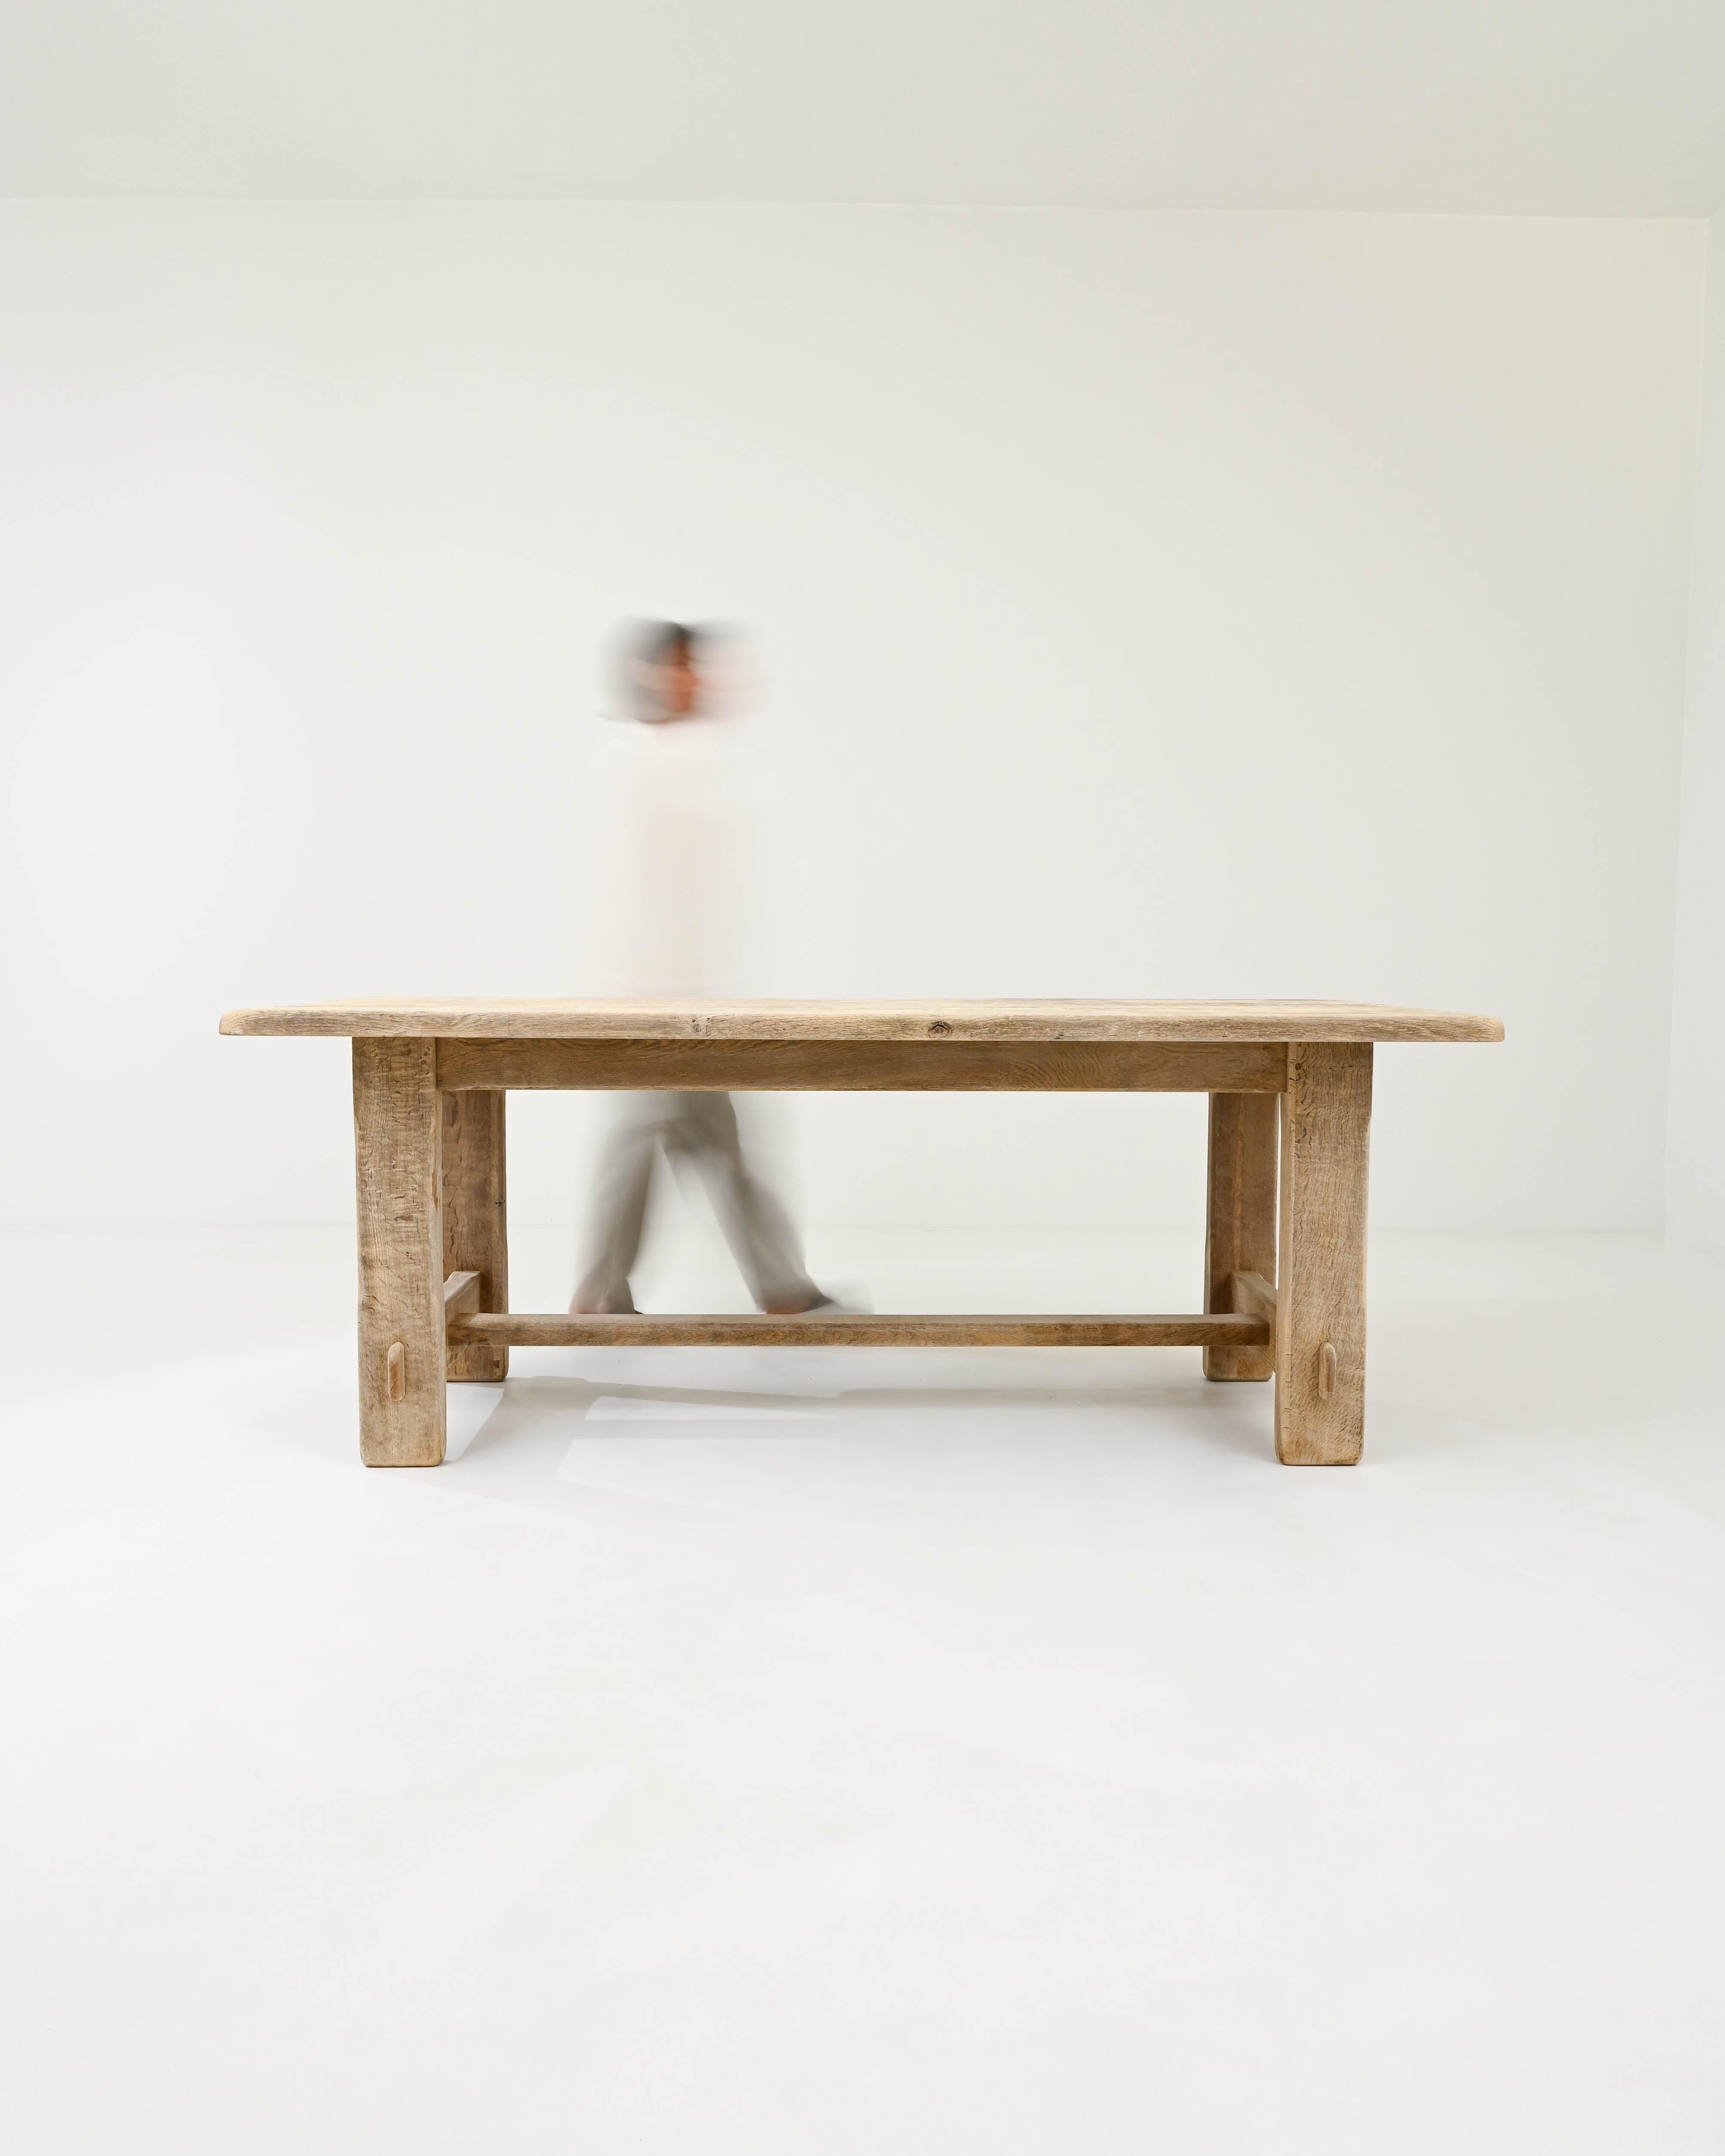 Bleached 20th Century Belgian Rustic Oak Dining Table